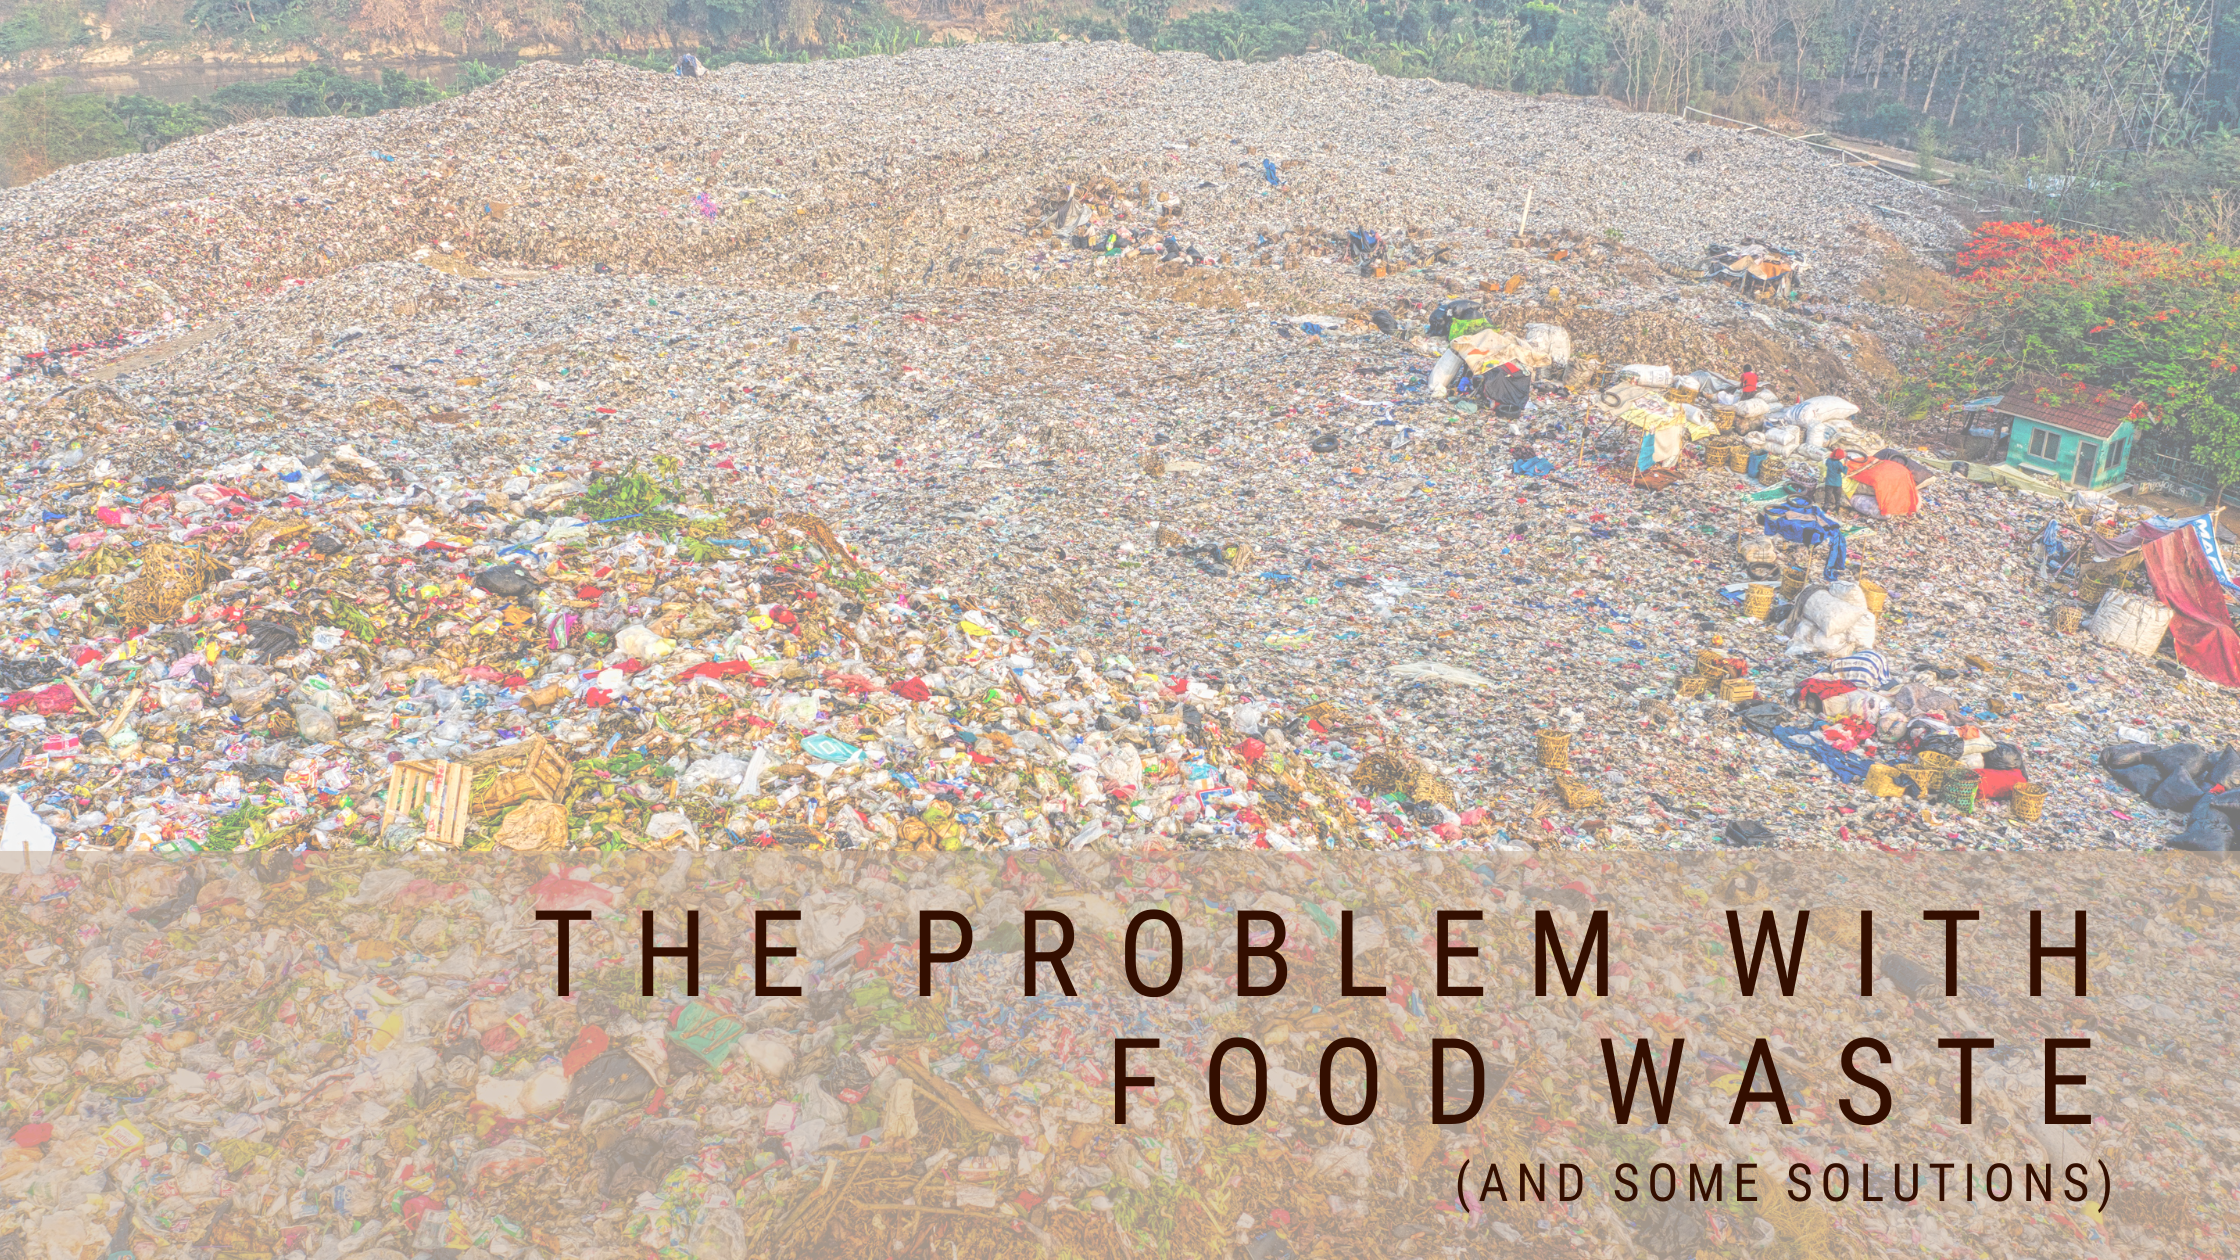 The problem with Food Waste